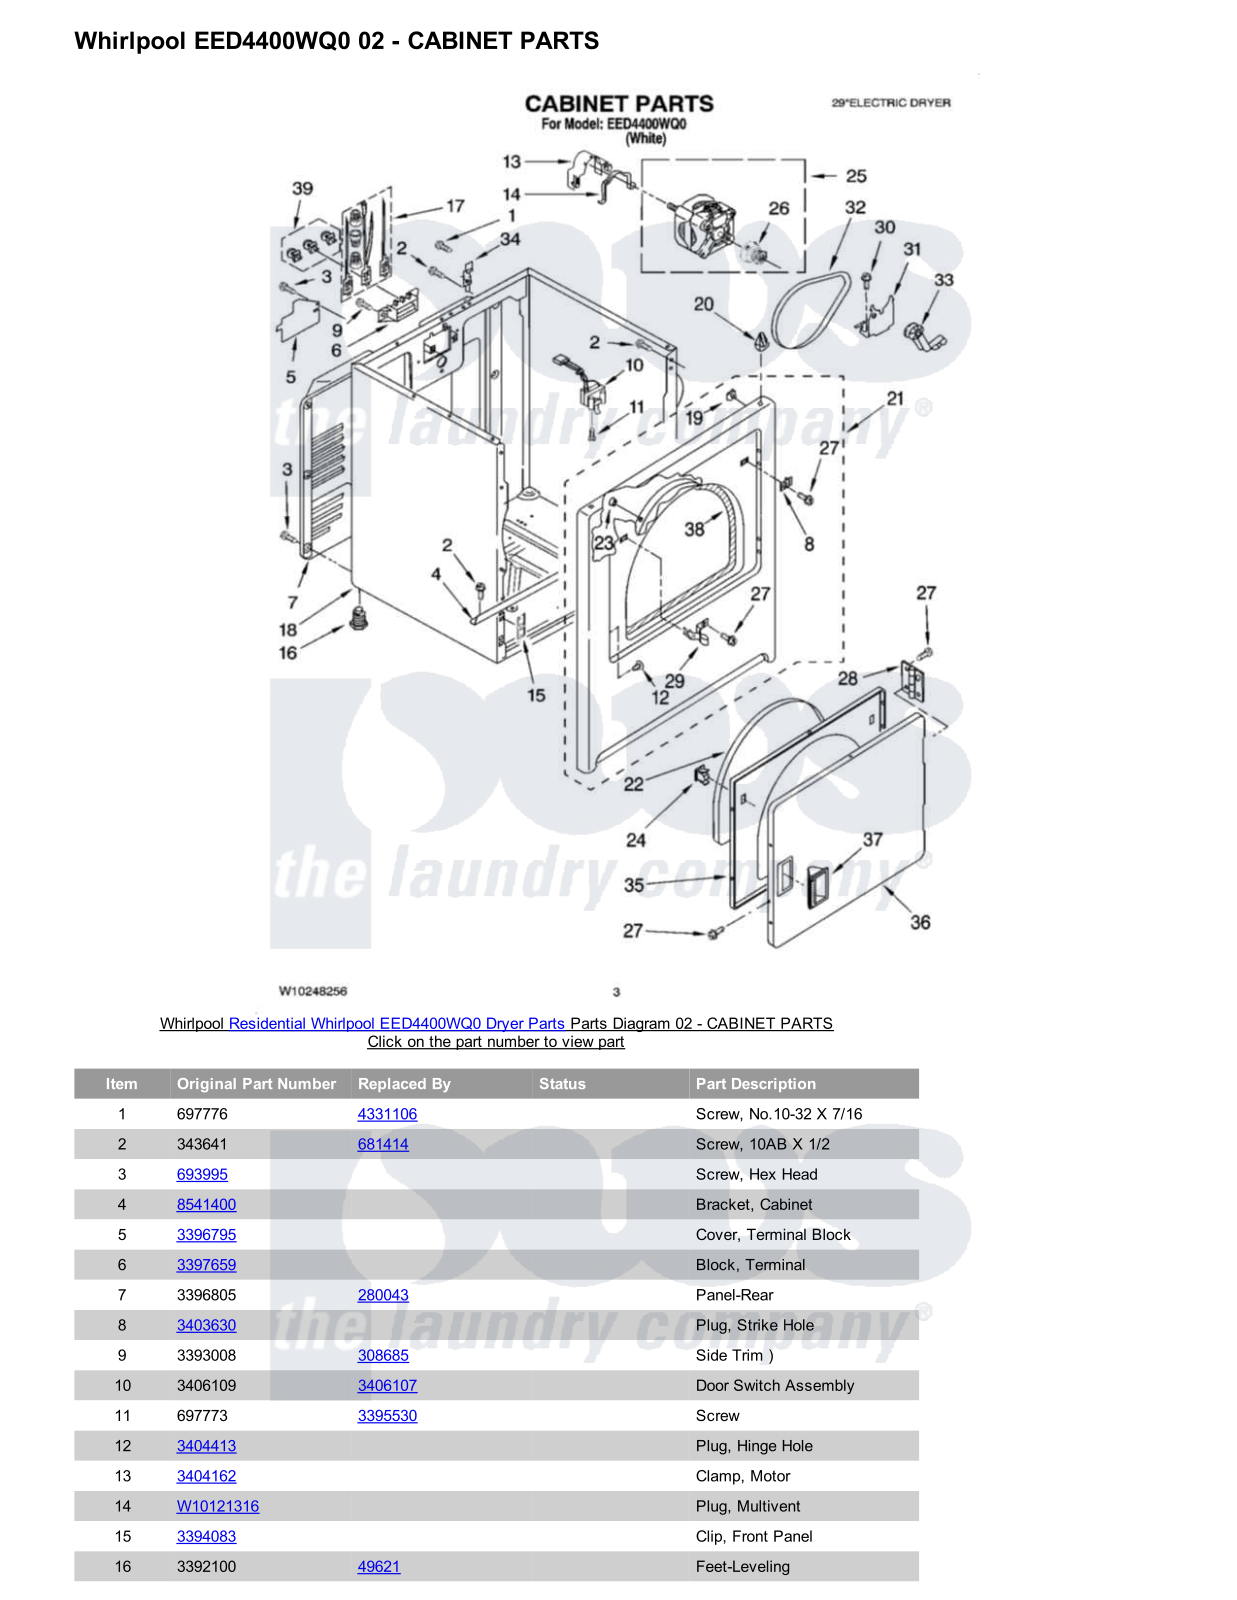 Whirlpool EED4400WQ0 Parts Diagram